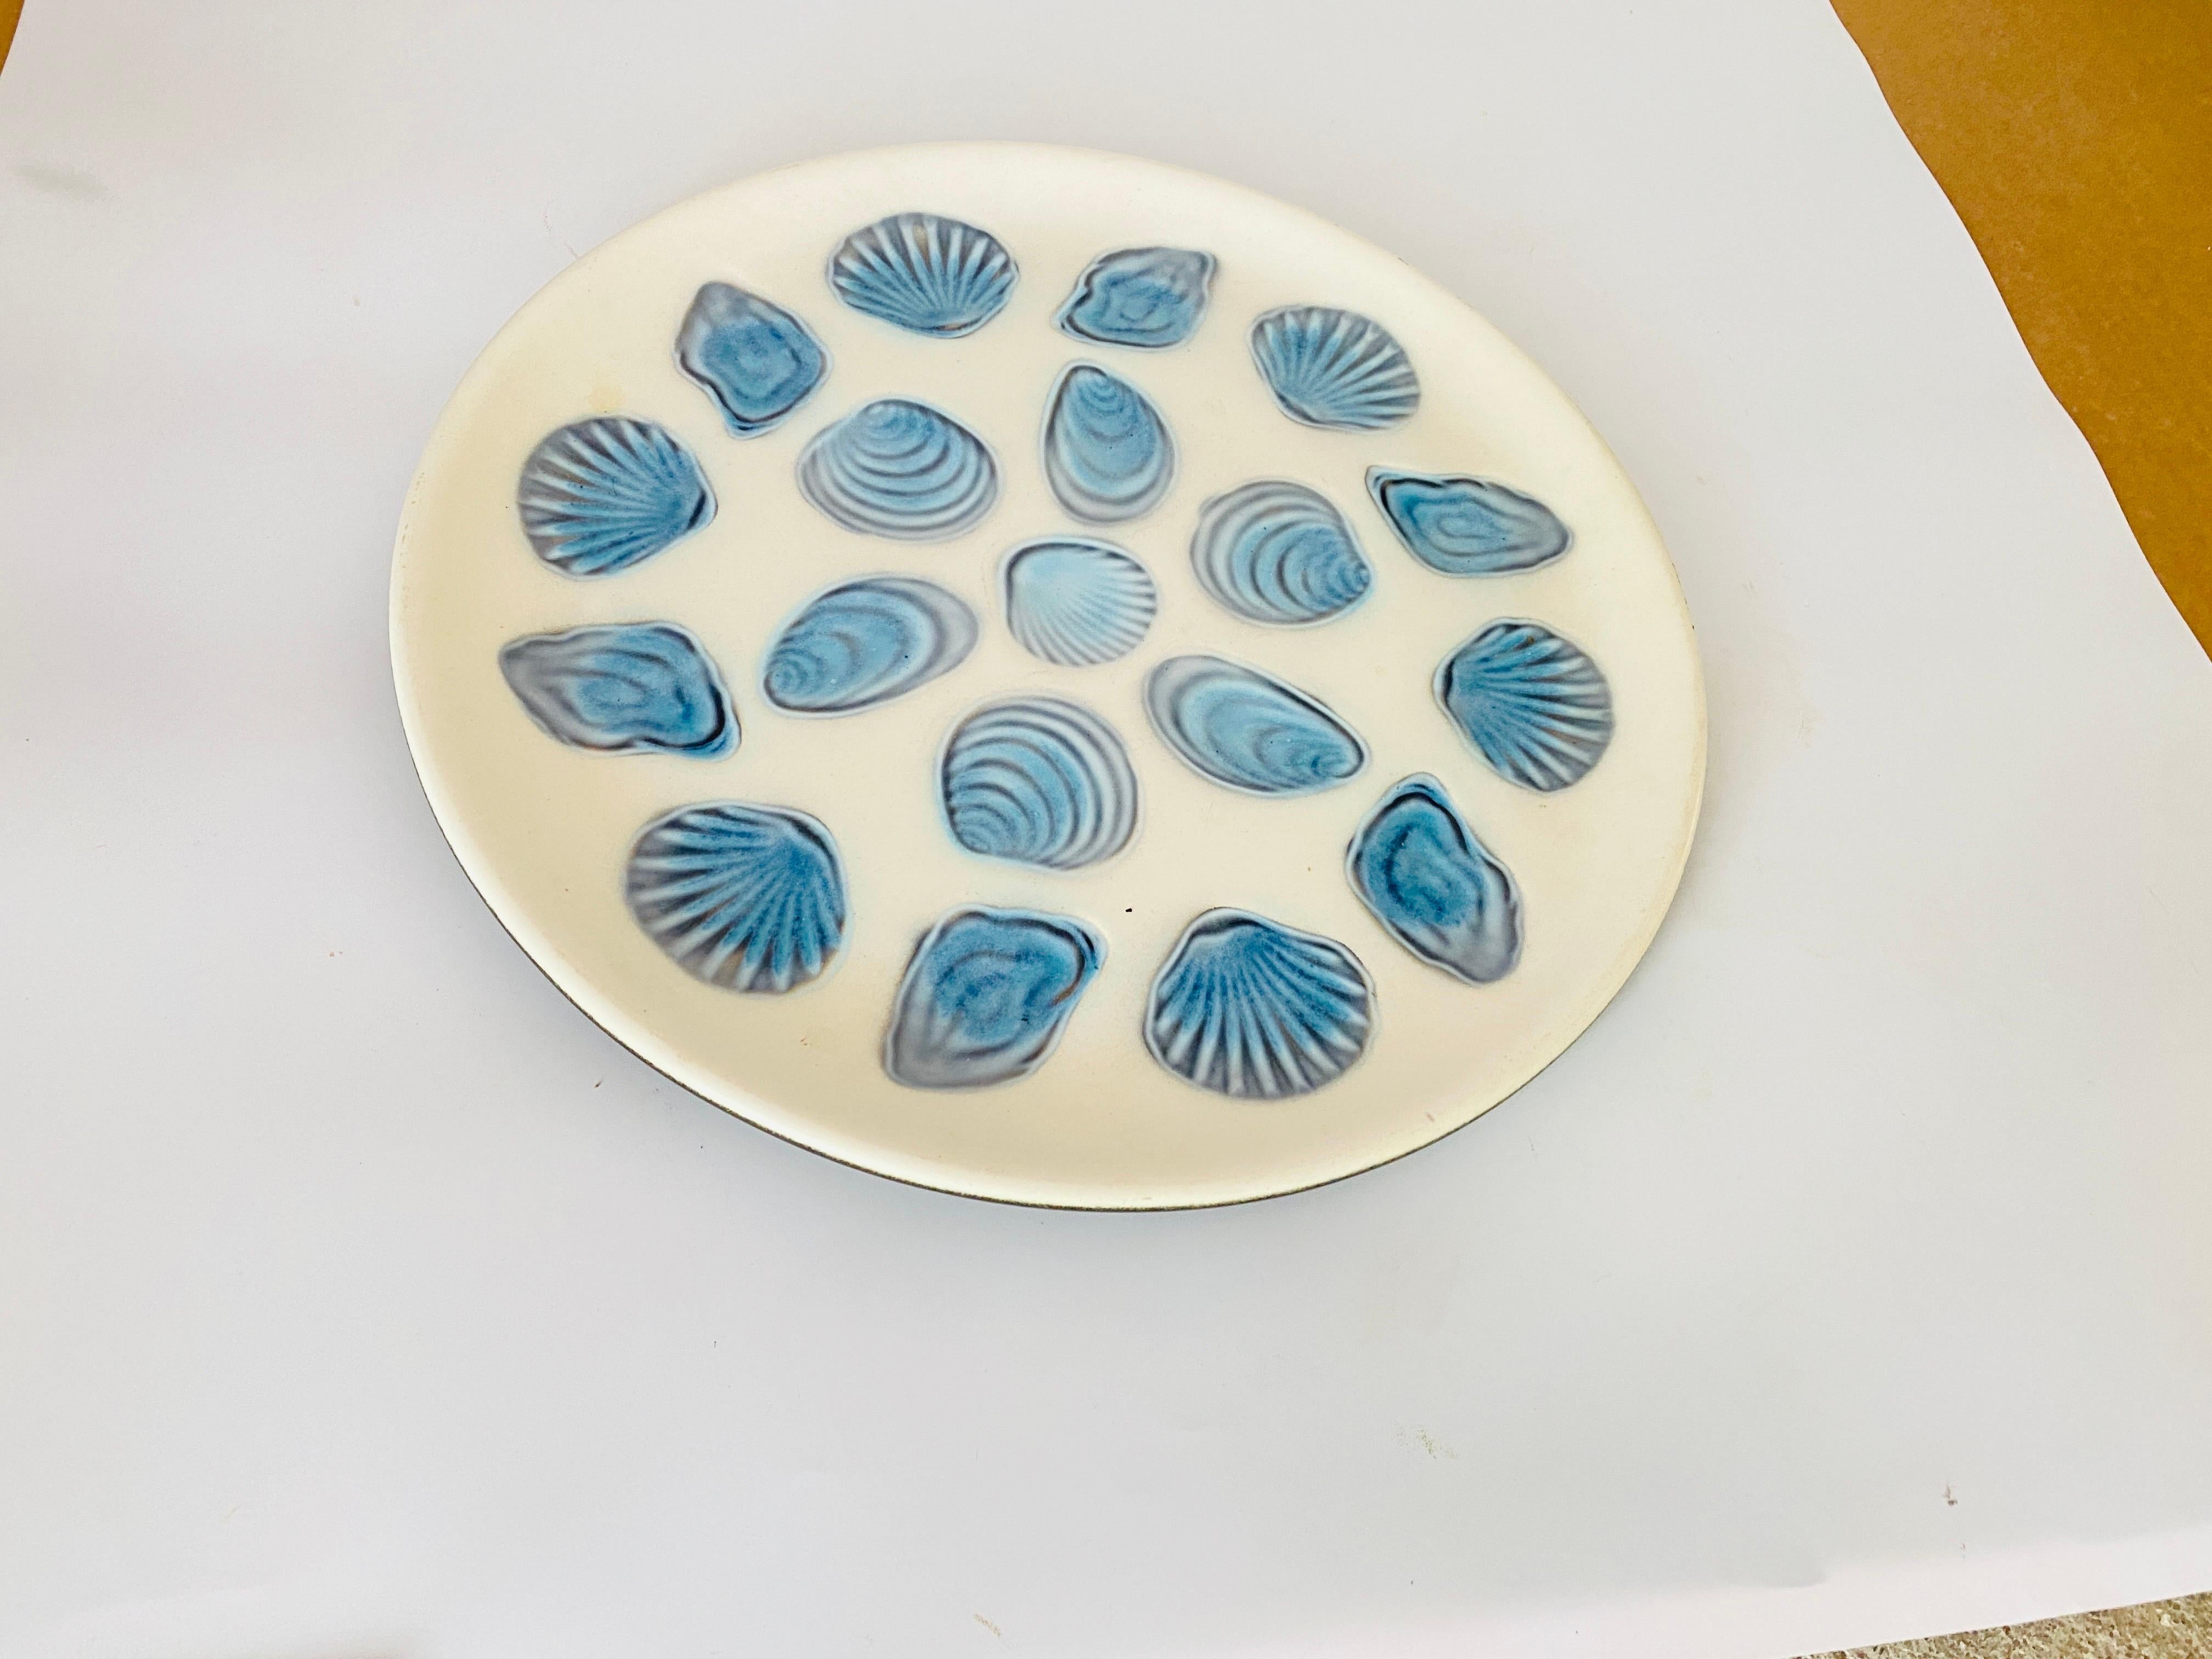 Large Oyster Plate in Ceramic Blue and White Color, 1960 France by Elchinger For Sale 2